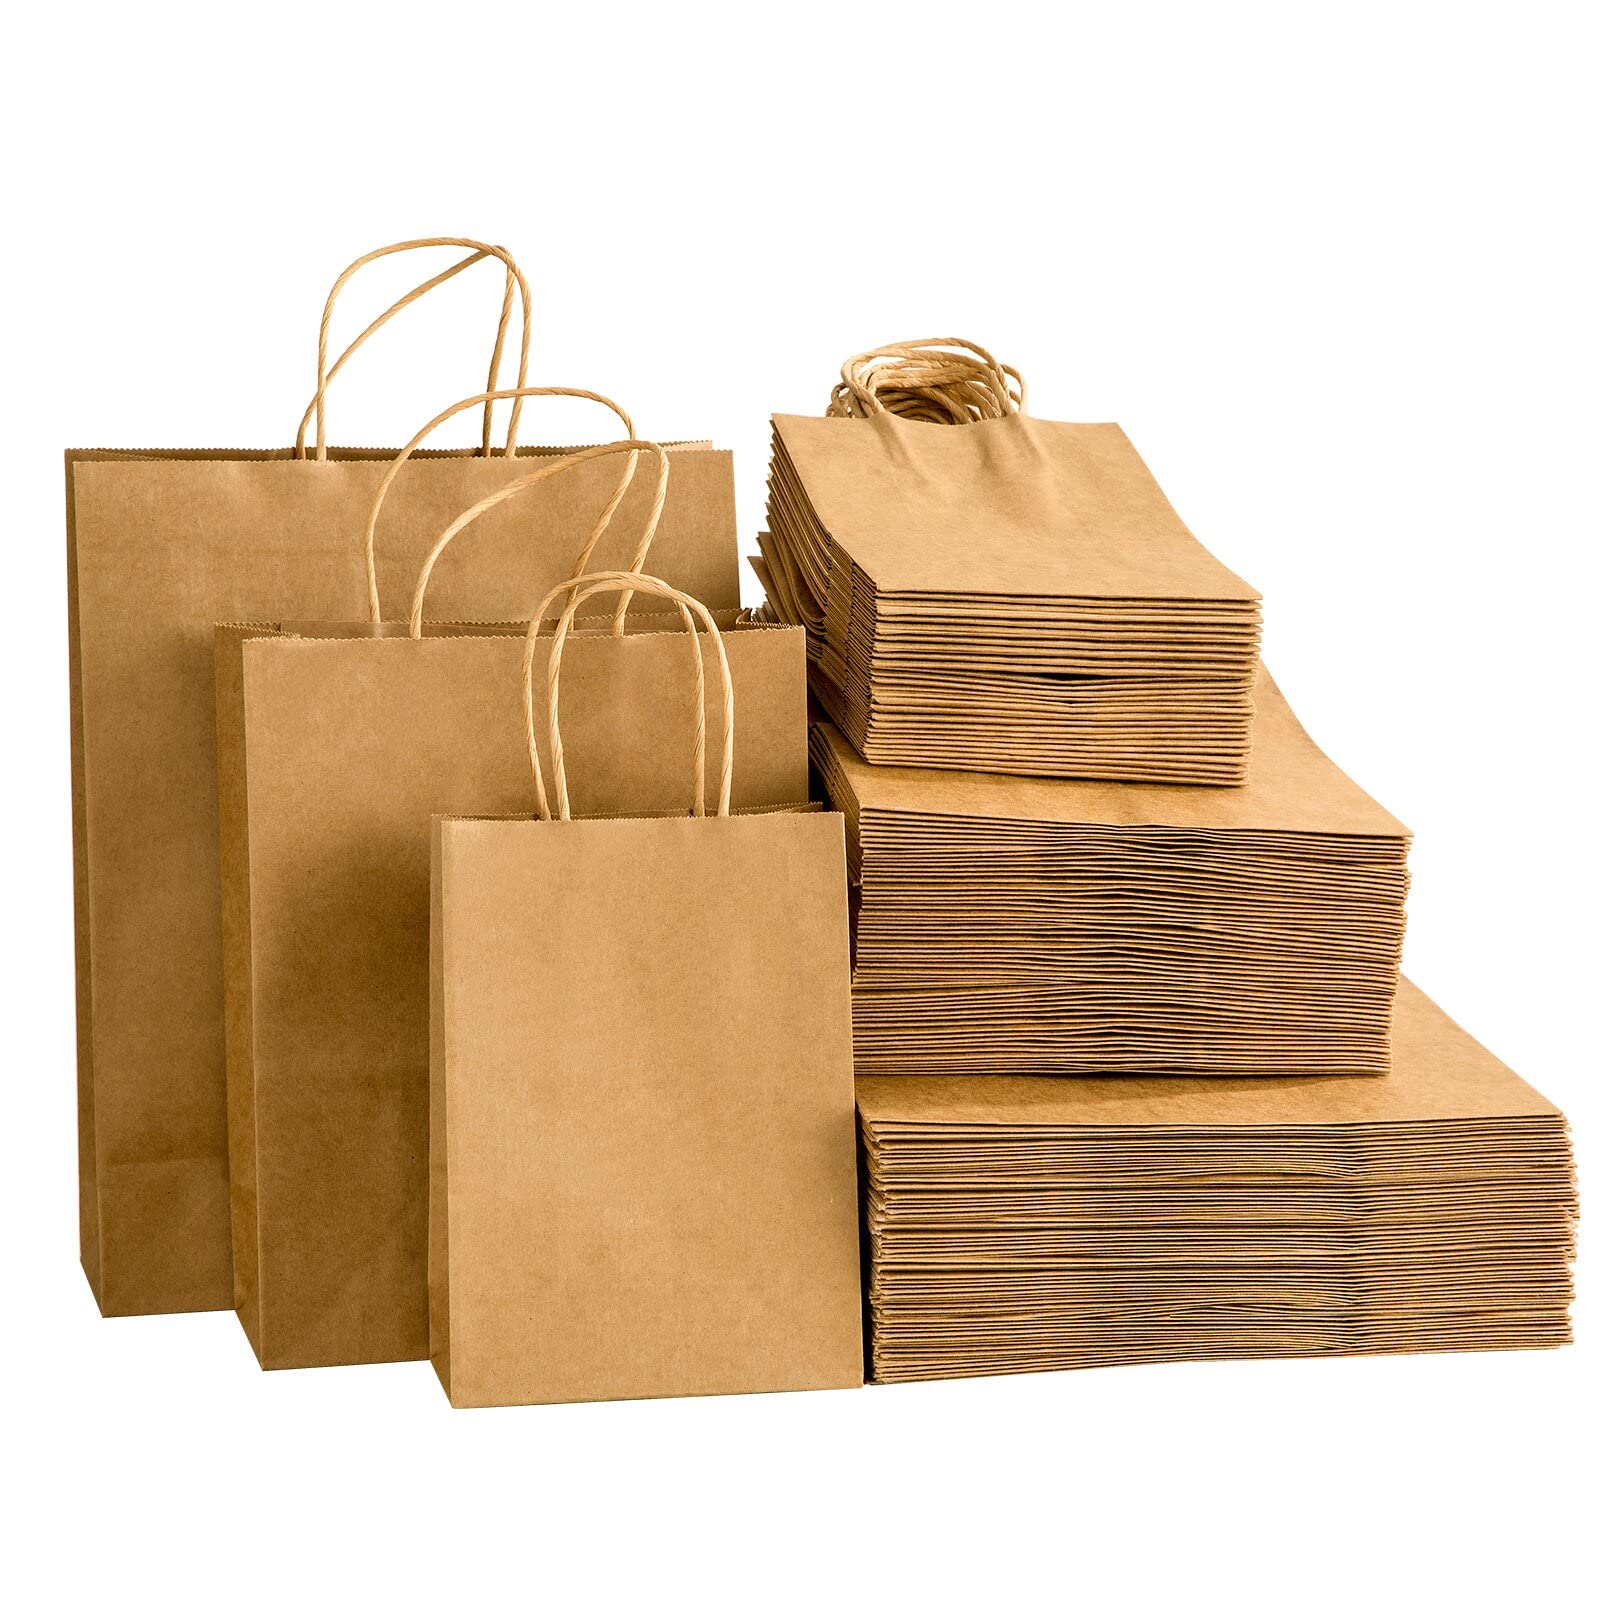 Amazon.com: Eupako 75pcs Kraft Paper Bags Assorted Sizes, Brown Paper Bags  with Handle Bulk, Paper Shopping Bags, Gift Bags for Business, Merchandise,  Retail, Grocery, Packaging, Party Favor : Health & Household